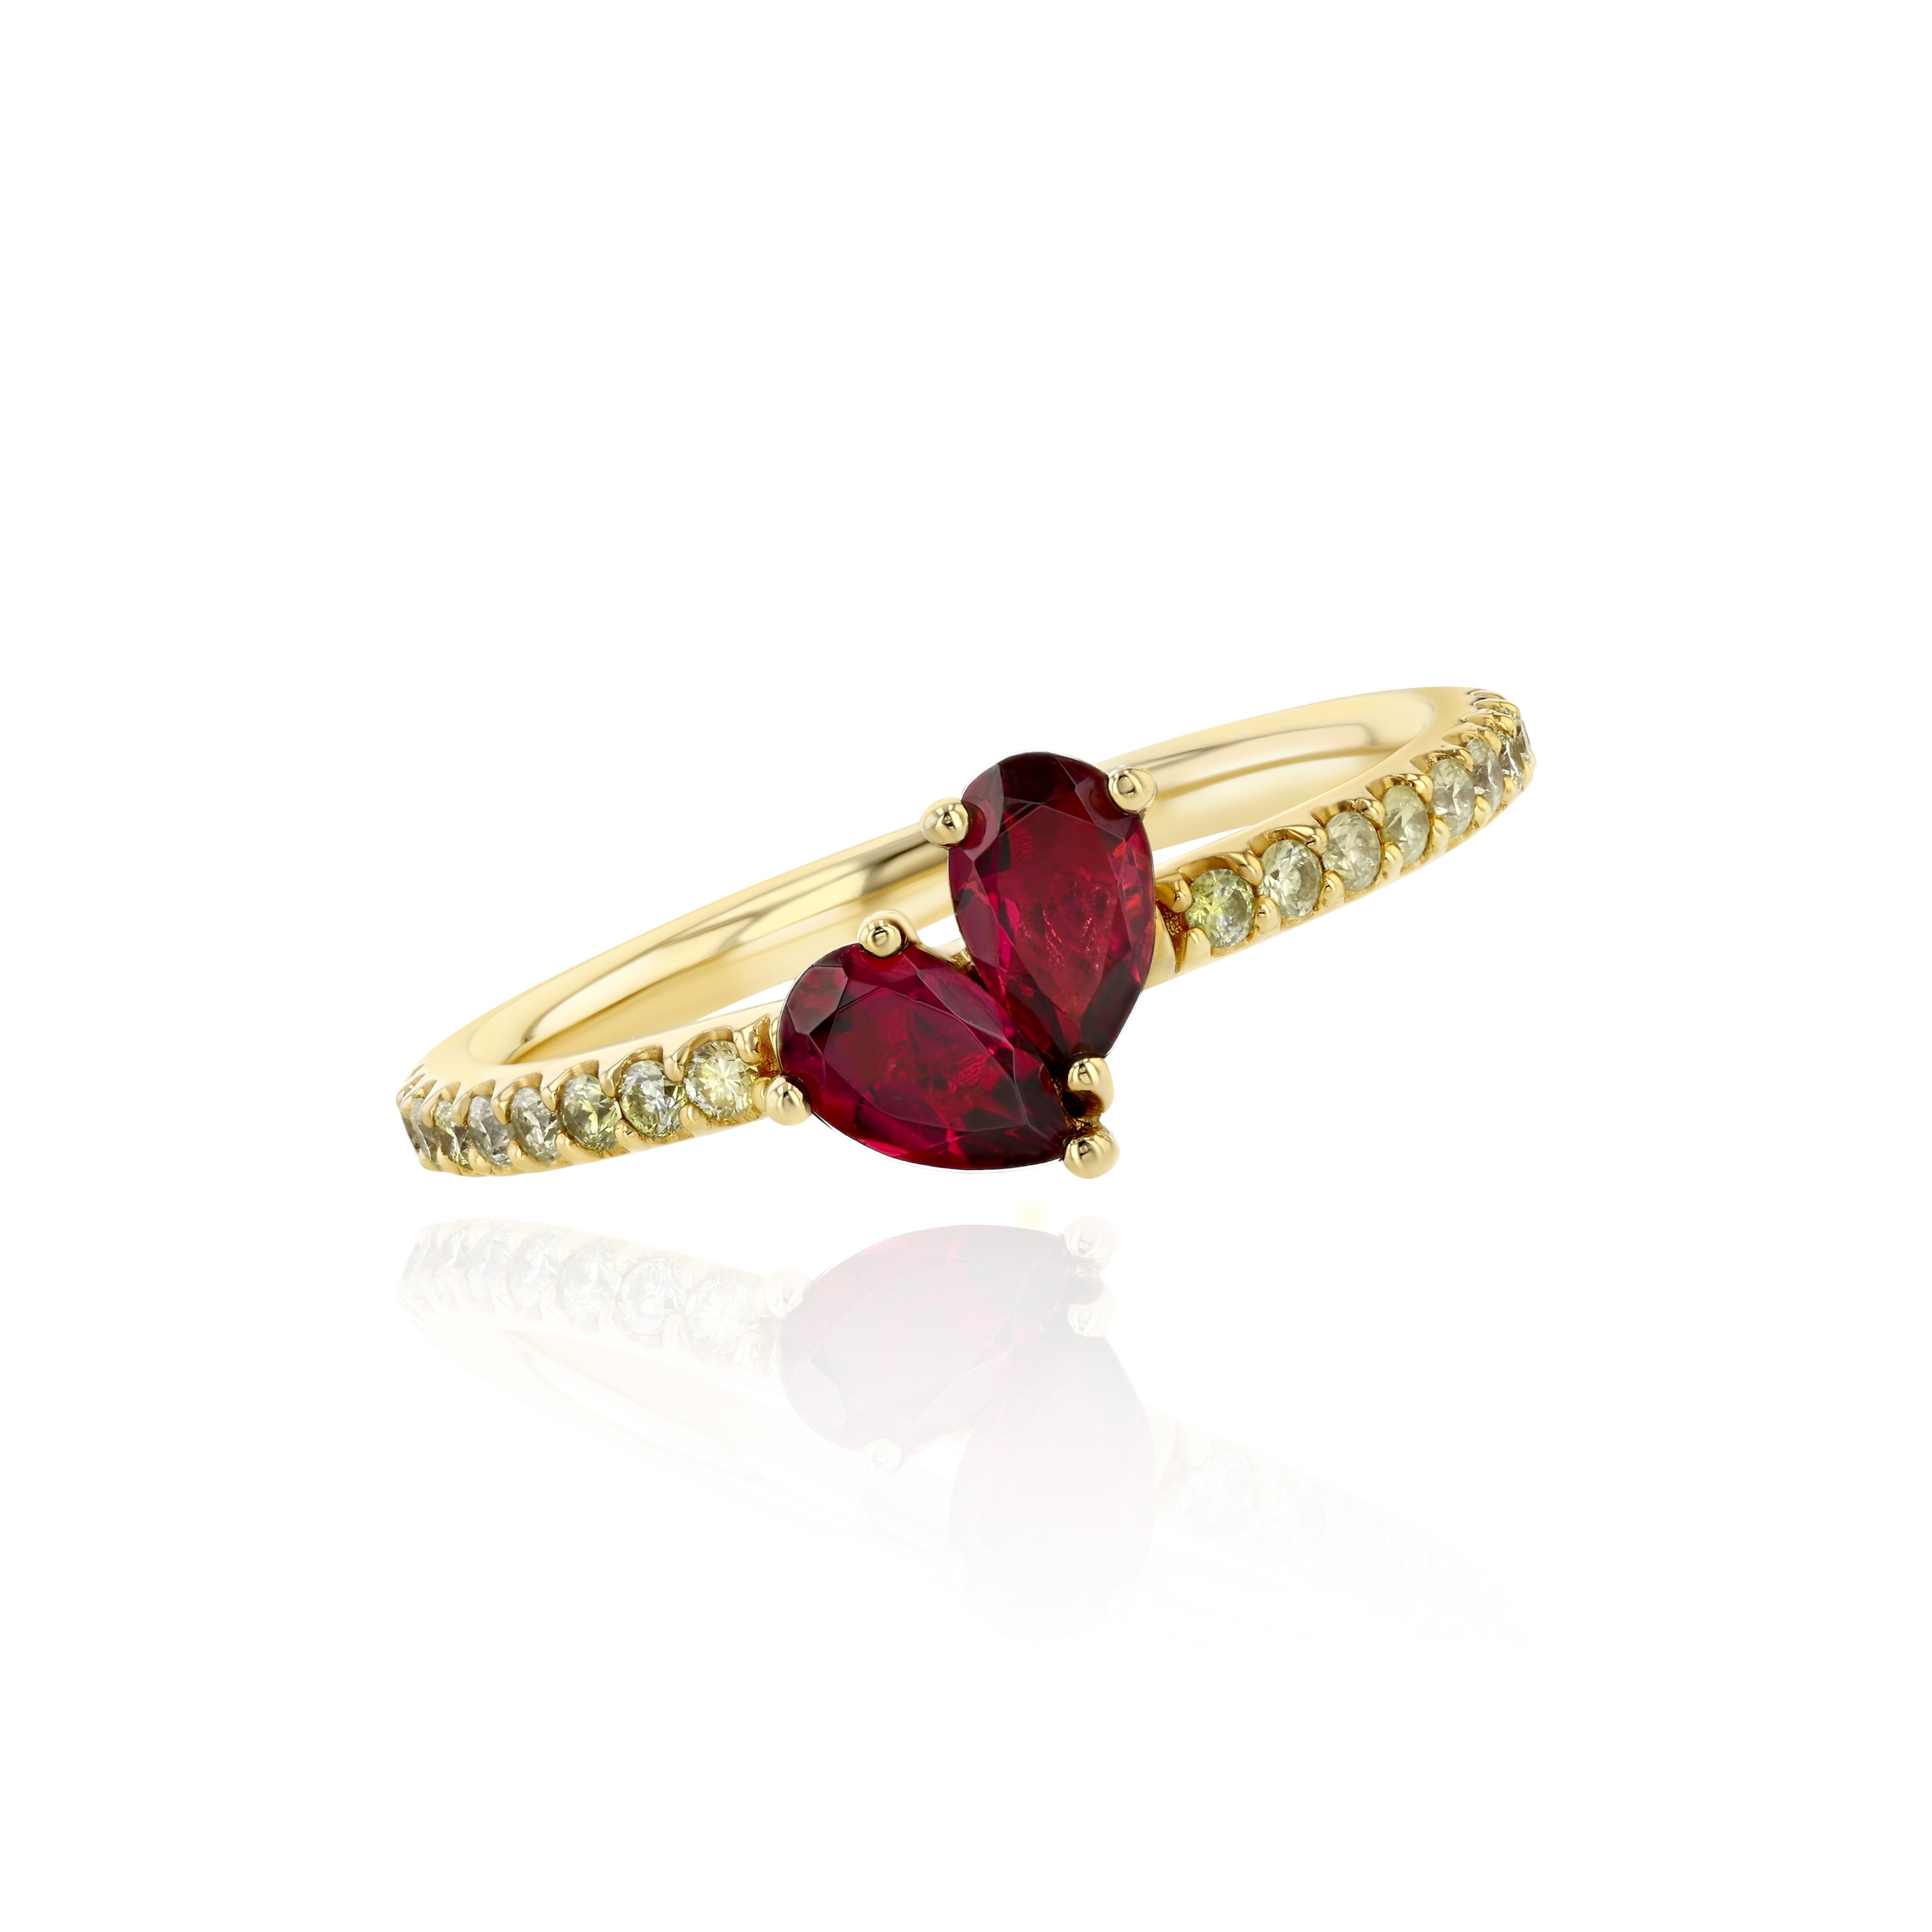 Yellow Gold, Diamond encrusted ring with pear shaped Rubellite, Small